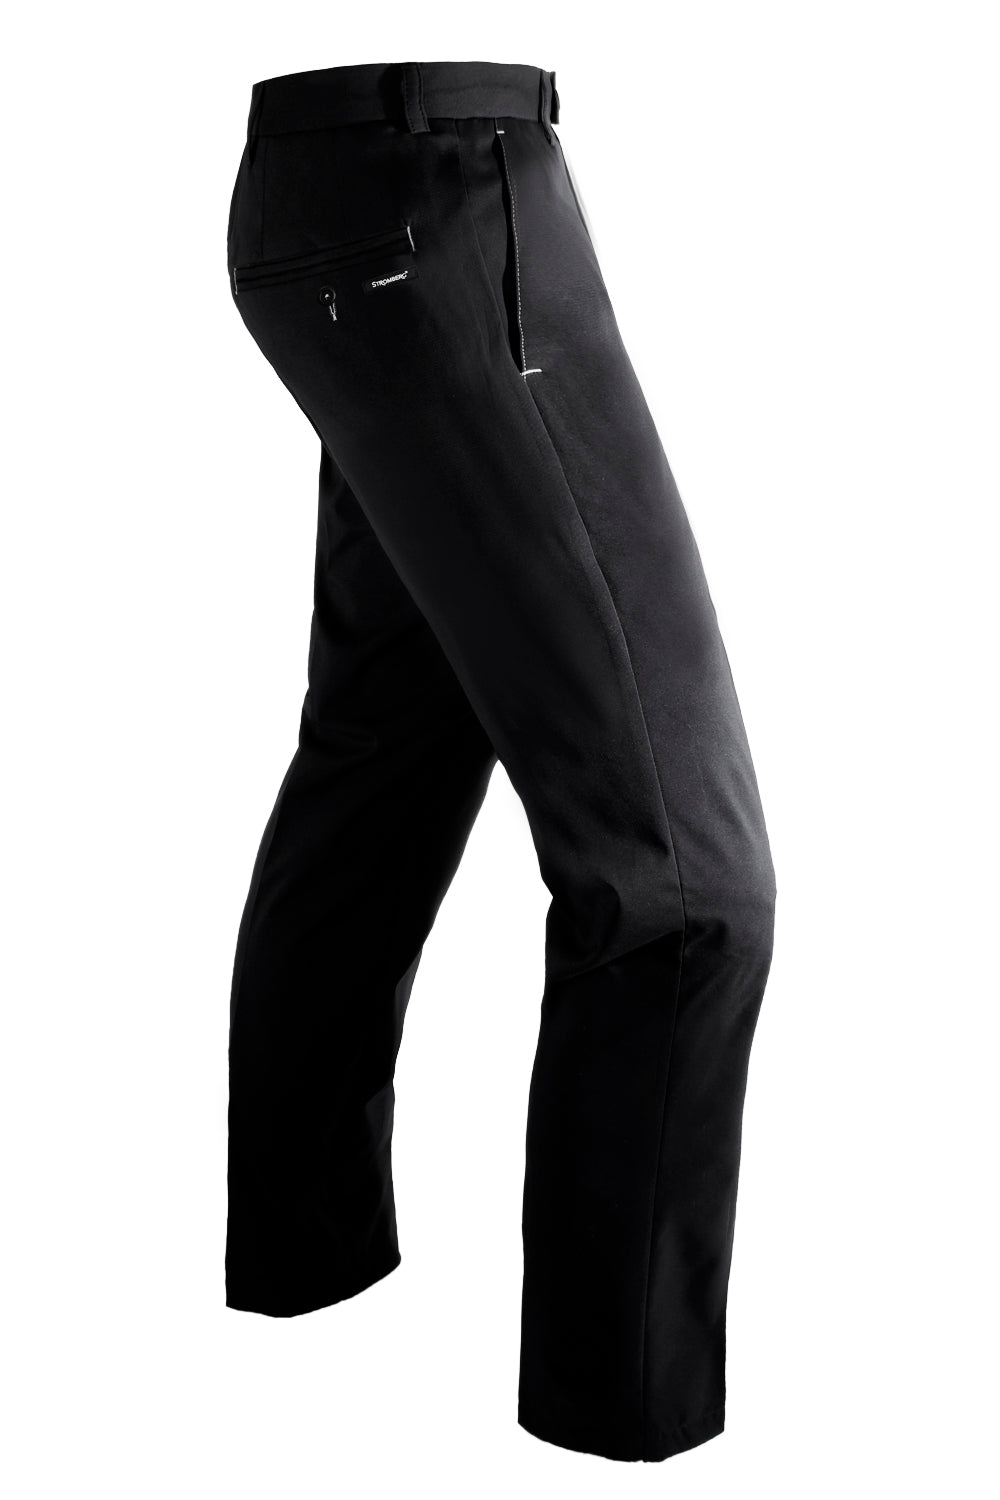 Weather-Lite 1.0 - Black - WeatherTECH - Water Resistant Trouser - Tapered Leg